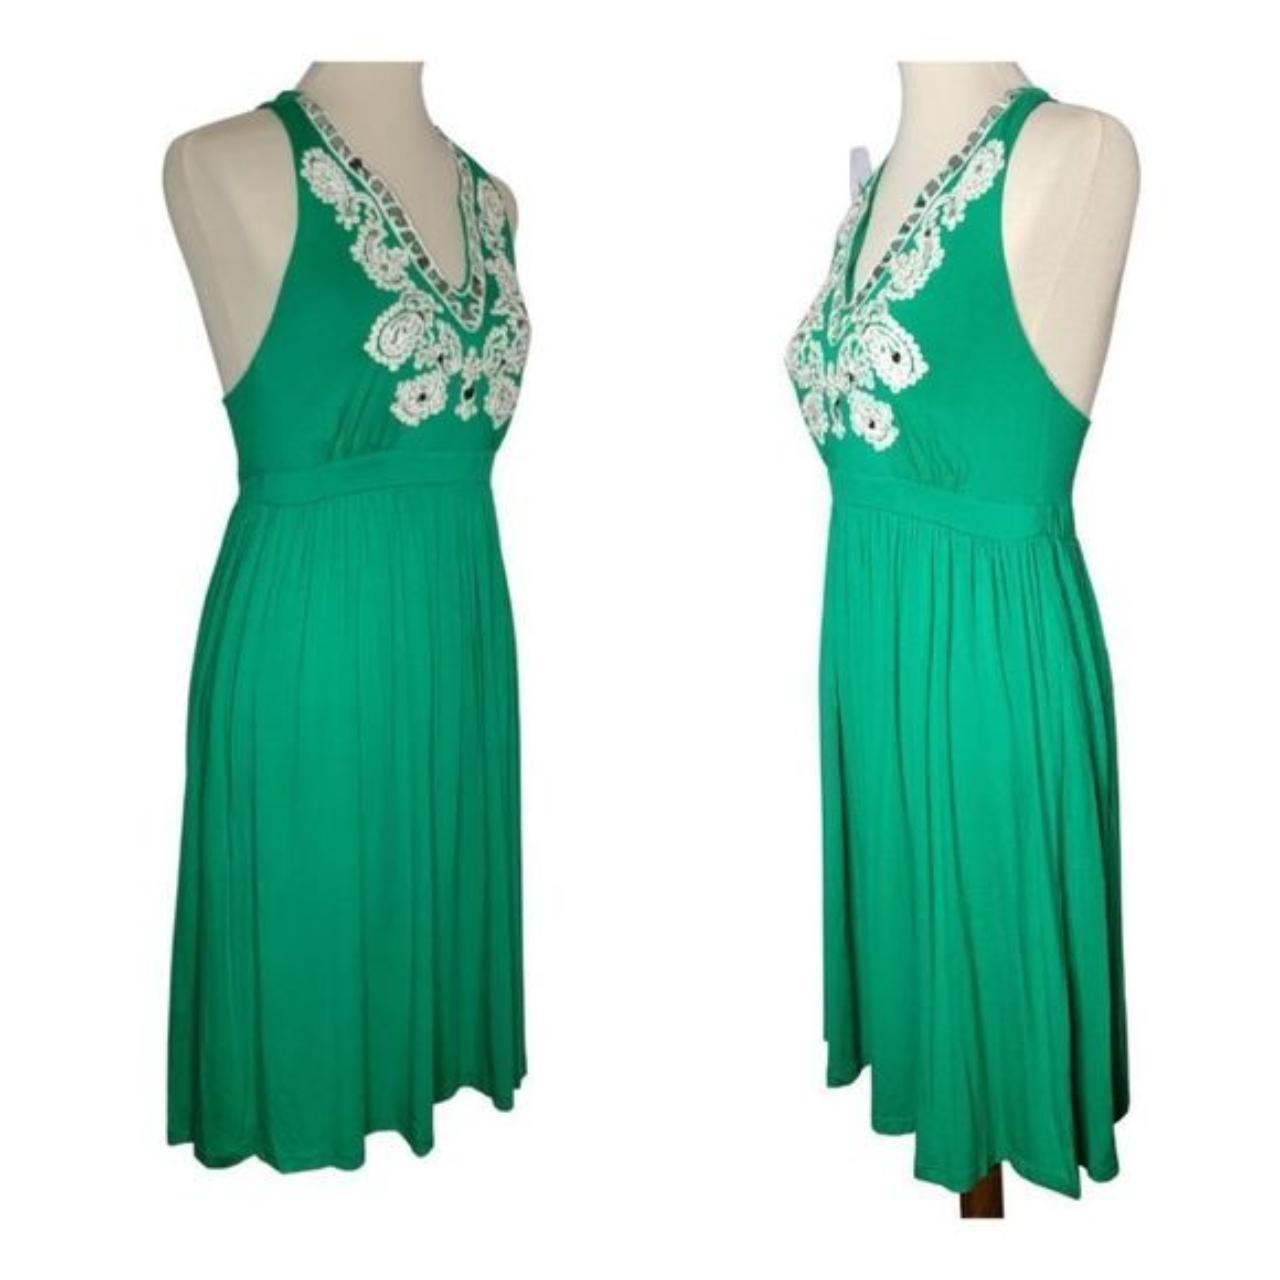 INC International Concepts Women's Green and White Dress (4)